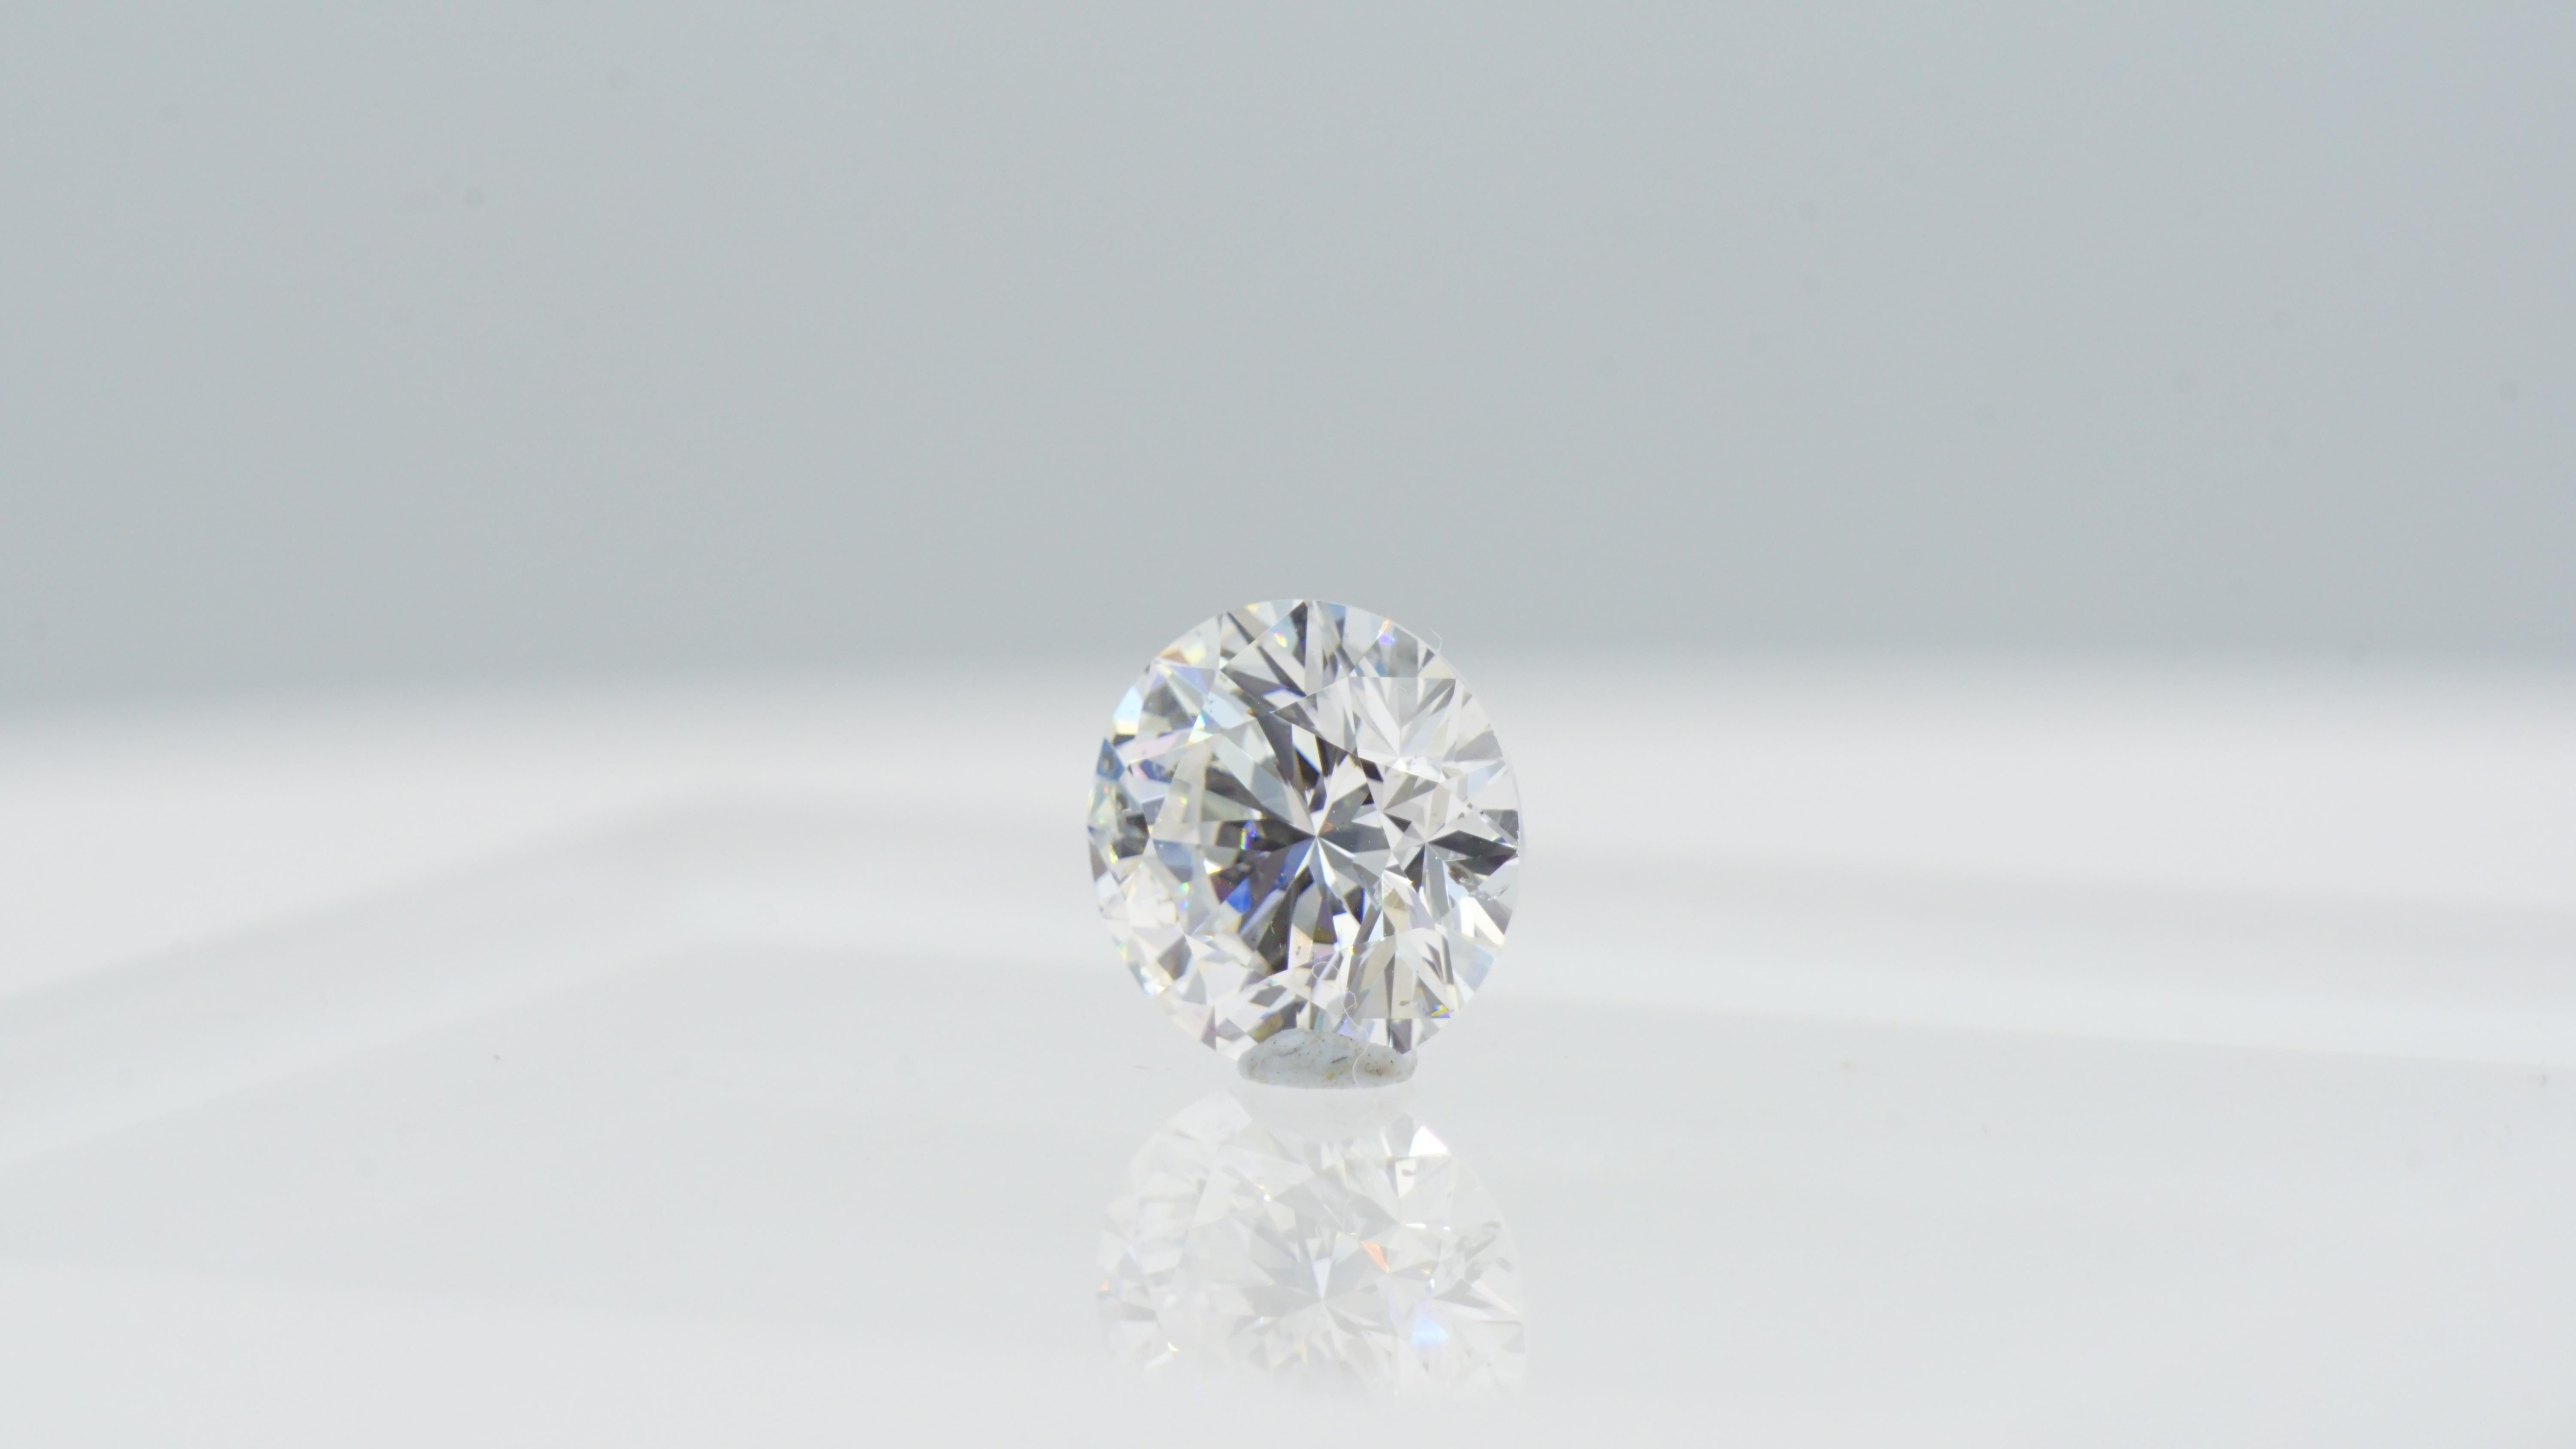 Beautiful 1.53ct round brilliant cut diamond that has been certified by GIA #168604401. See the GIA certificate in the image gallery.  Design your own jewelry piece with this diamond. The diamond is colorless E Color, SI 2 in clarity, and has